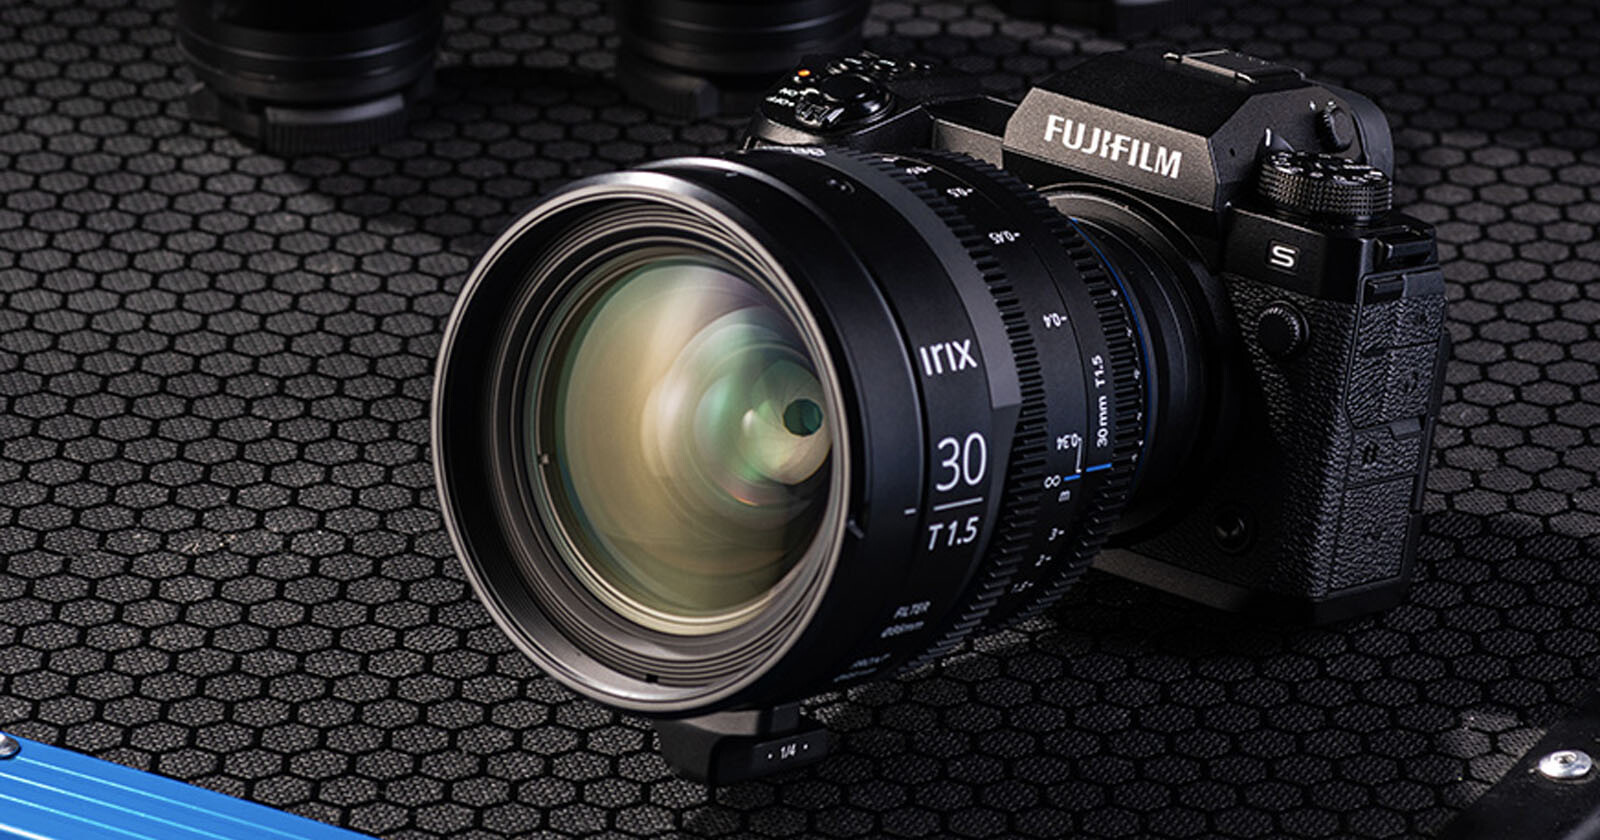 Irix Expands Cinema Lens Support to Include Fujifilm X Mount